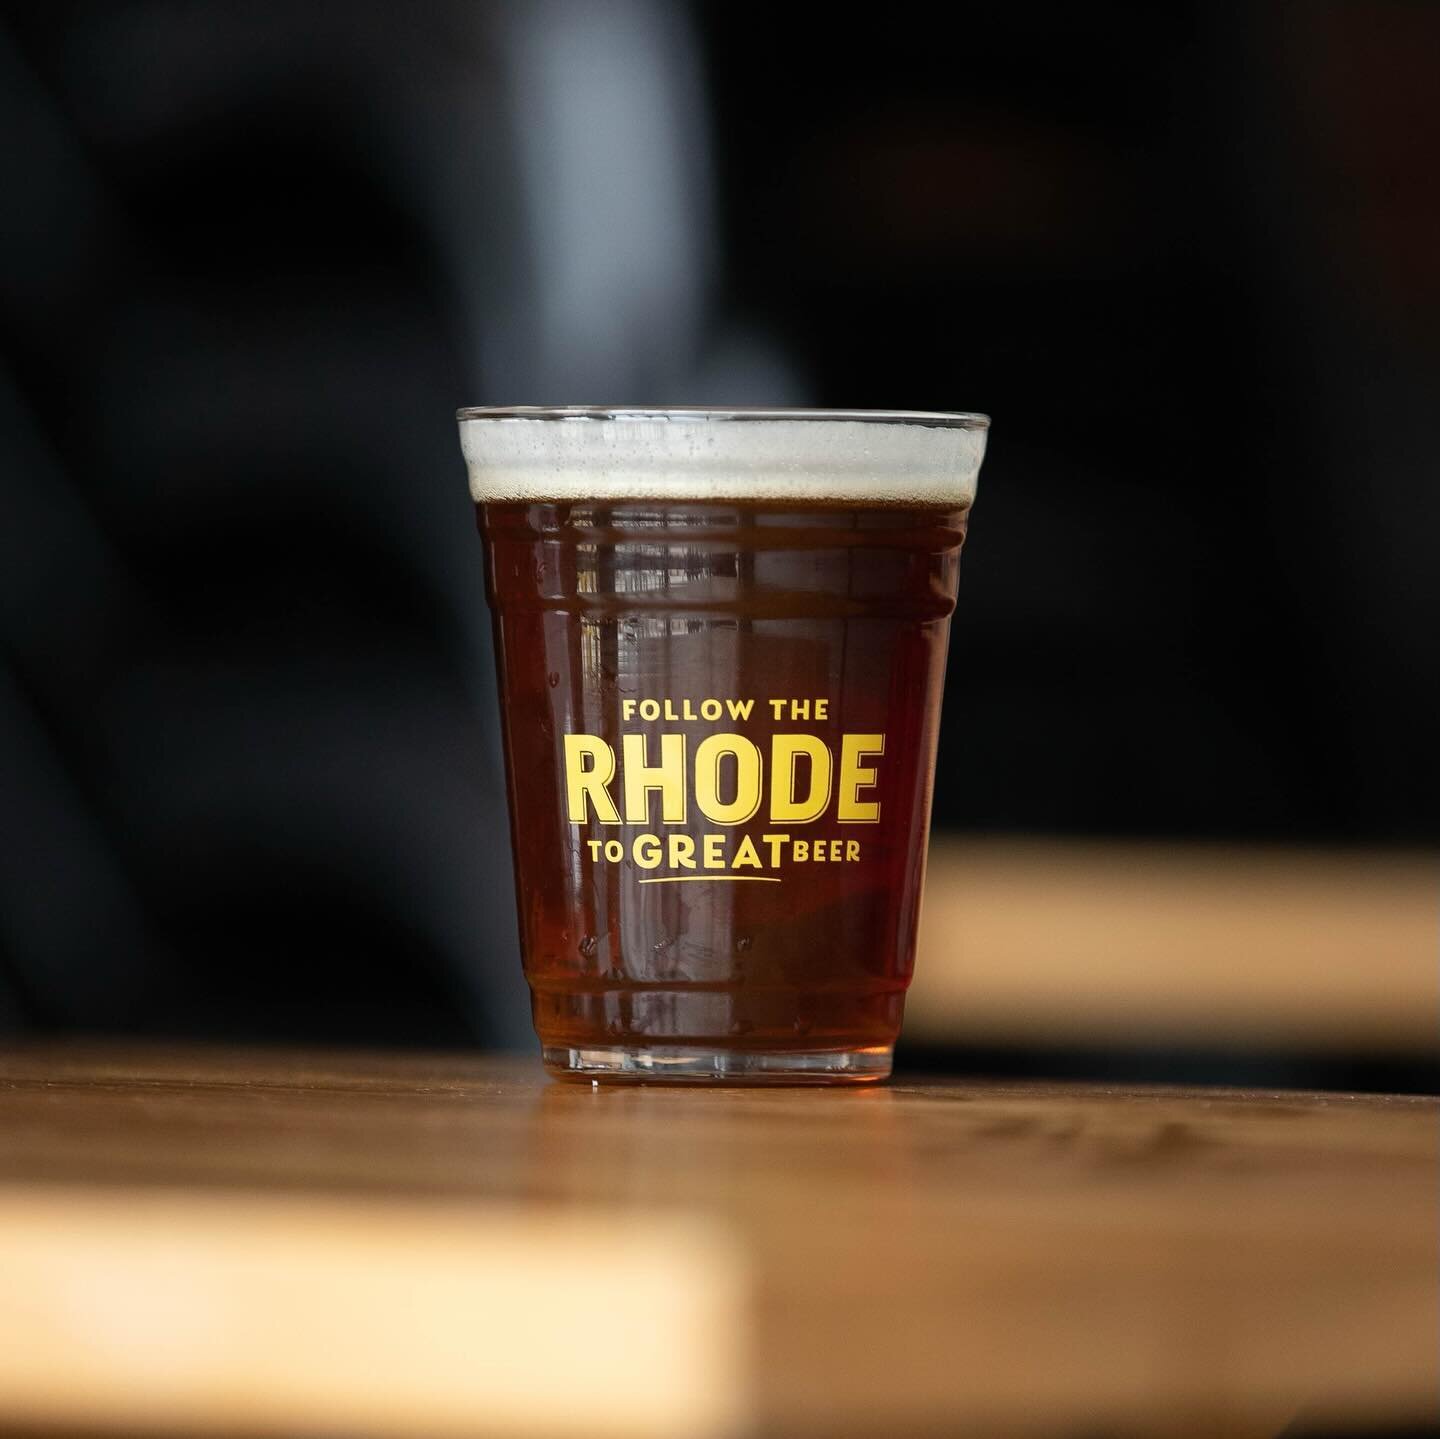 Are you excited for RI Craft Beer Week?! We know we are! We&rsquo;re on a mission to celebrate RI craft beer so make sure to check out all the fun events across the state at the link in the bio! With that being said, we have some more exciting news&h